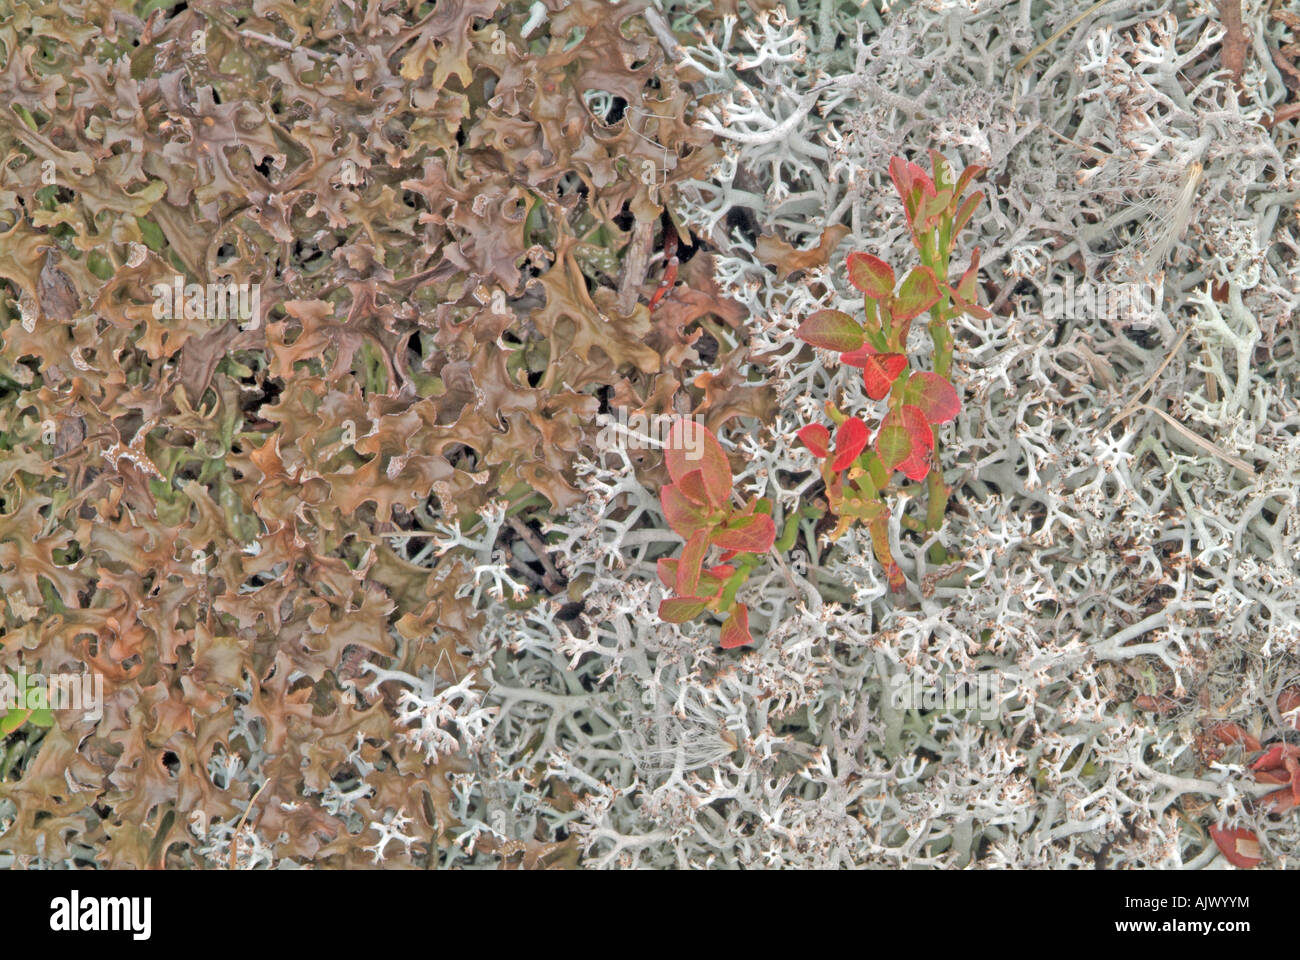 Iceland Moss (Cetraria islandica) to the left, Reindeer Lichen (Cladonia portentosa) to the right Stock Photo